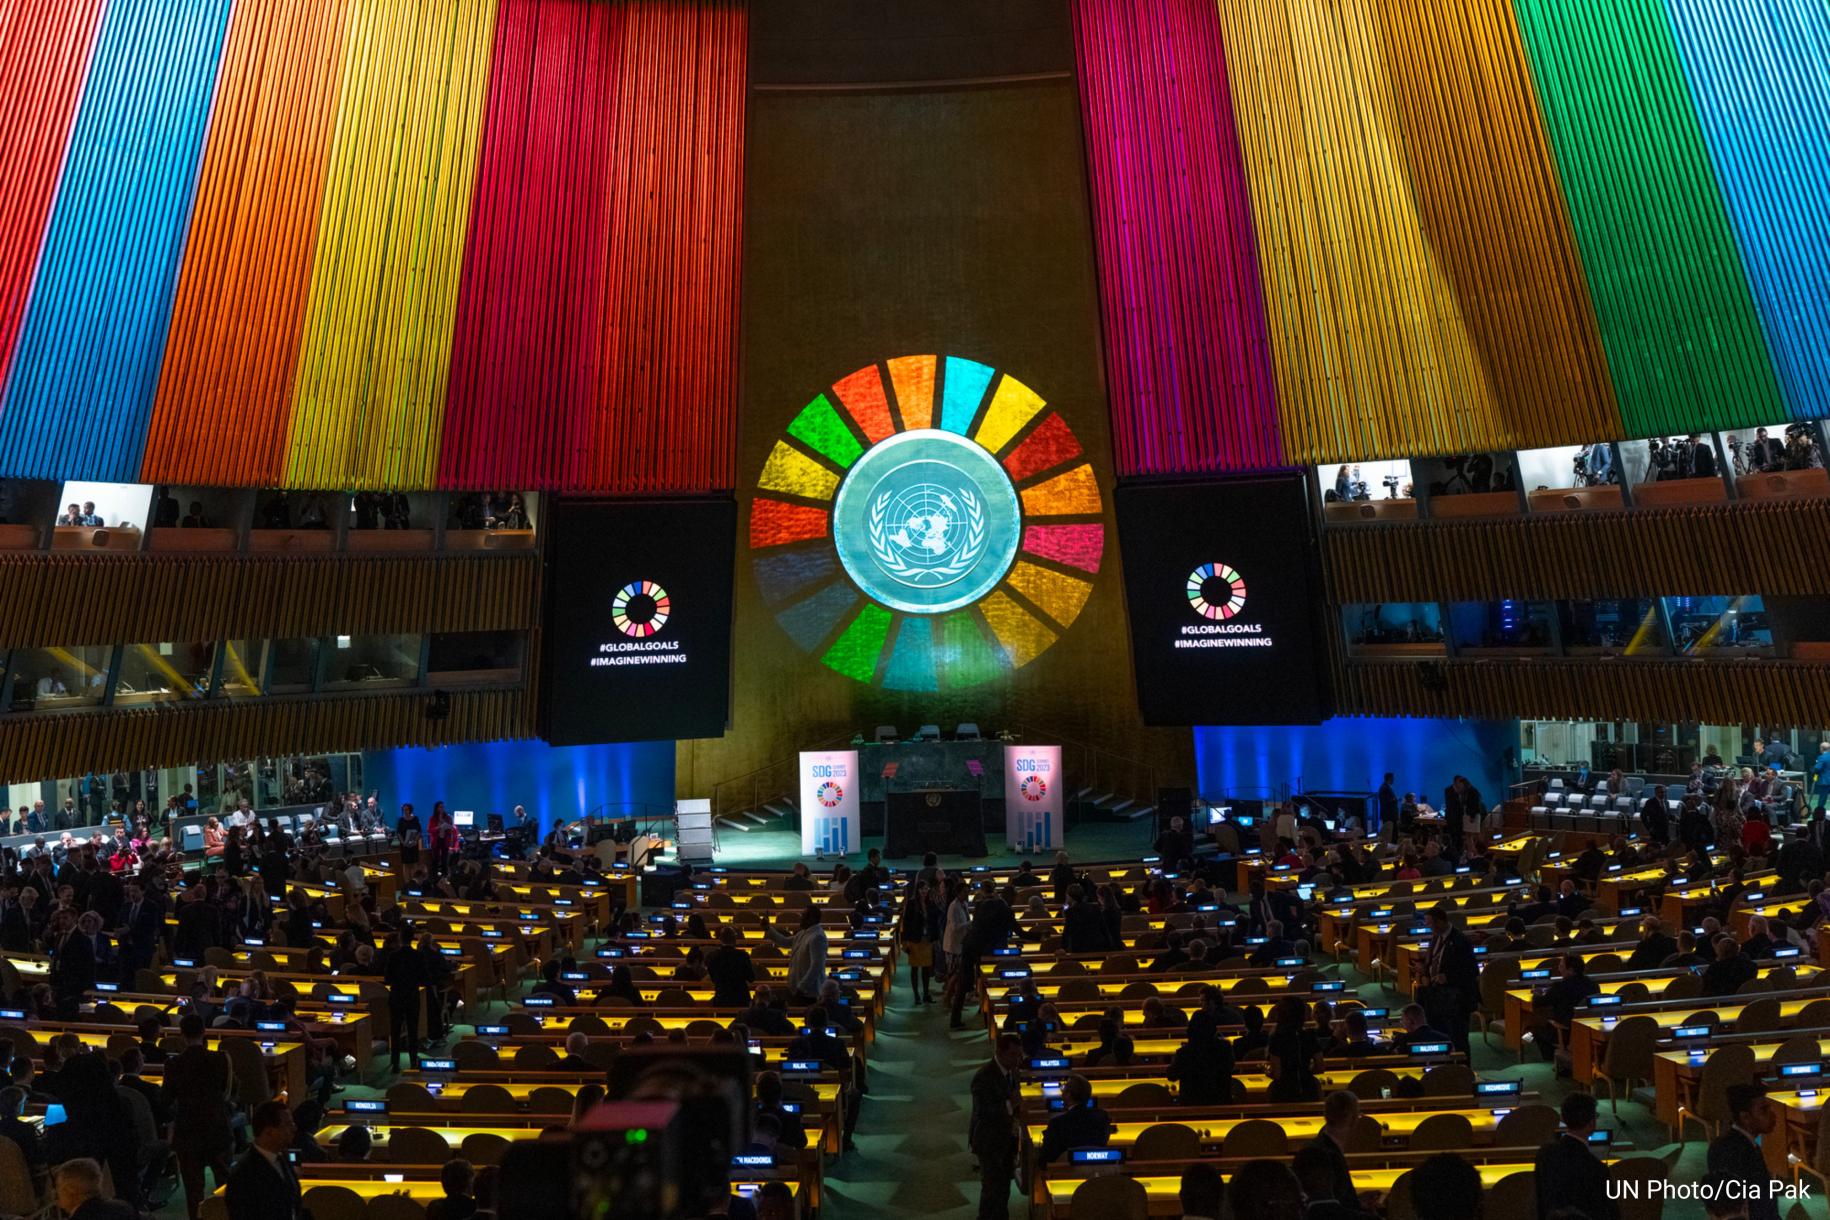 General Assembly hall light up with projection of SDG wheel. 